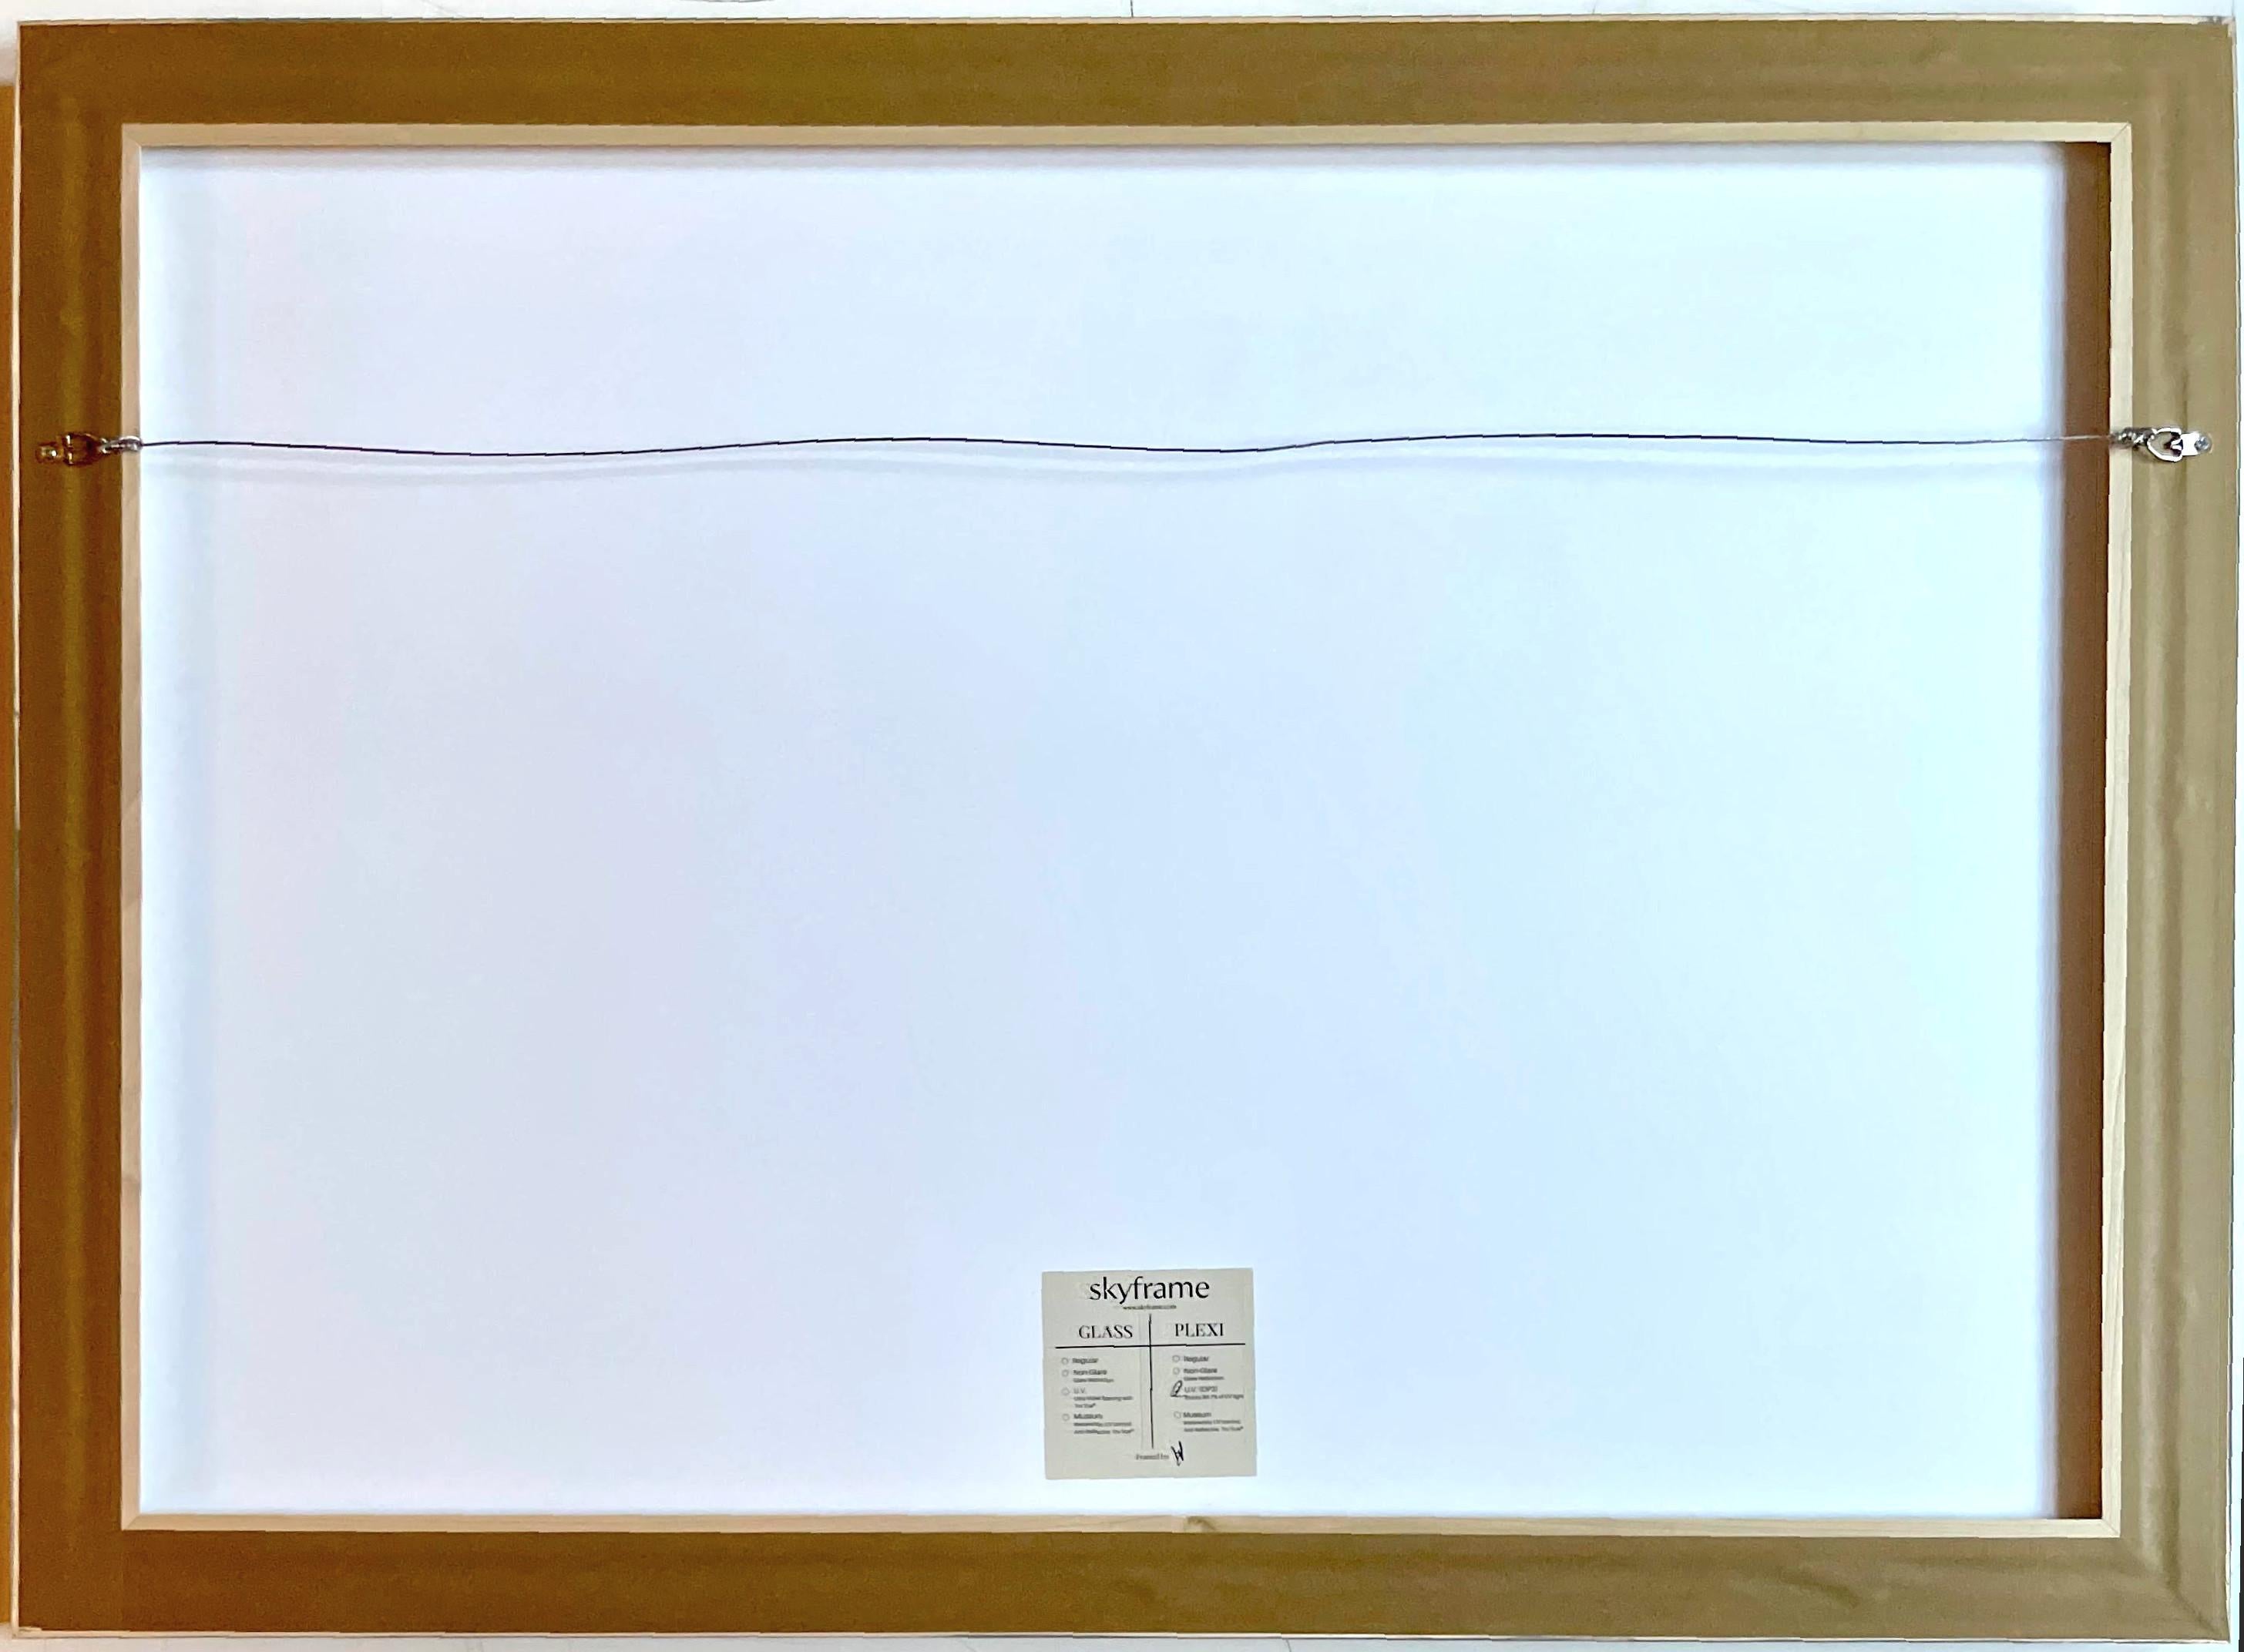 Kenneth Noland
Ojai Festival print (Deluxe signed limited edition), 1986
Offset Lithograph
Hand signed and numbered 6/100 by Kenneth Noland on lower front
Frame included:  framed in a museum quality white wood frame with UV plexiglass
One of only